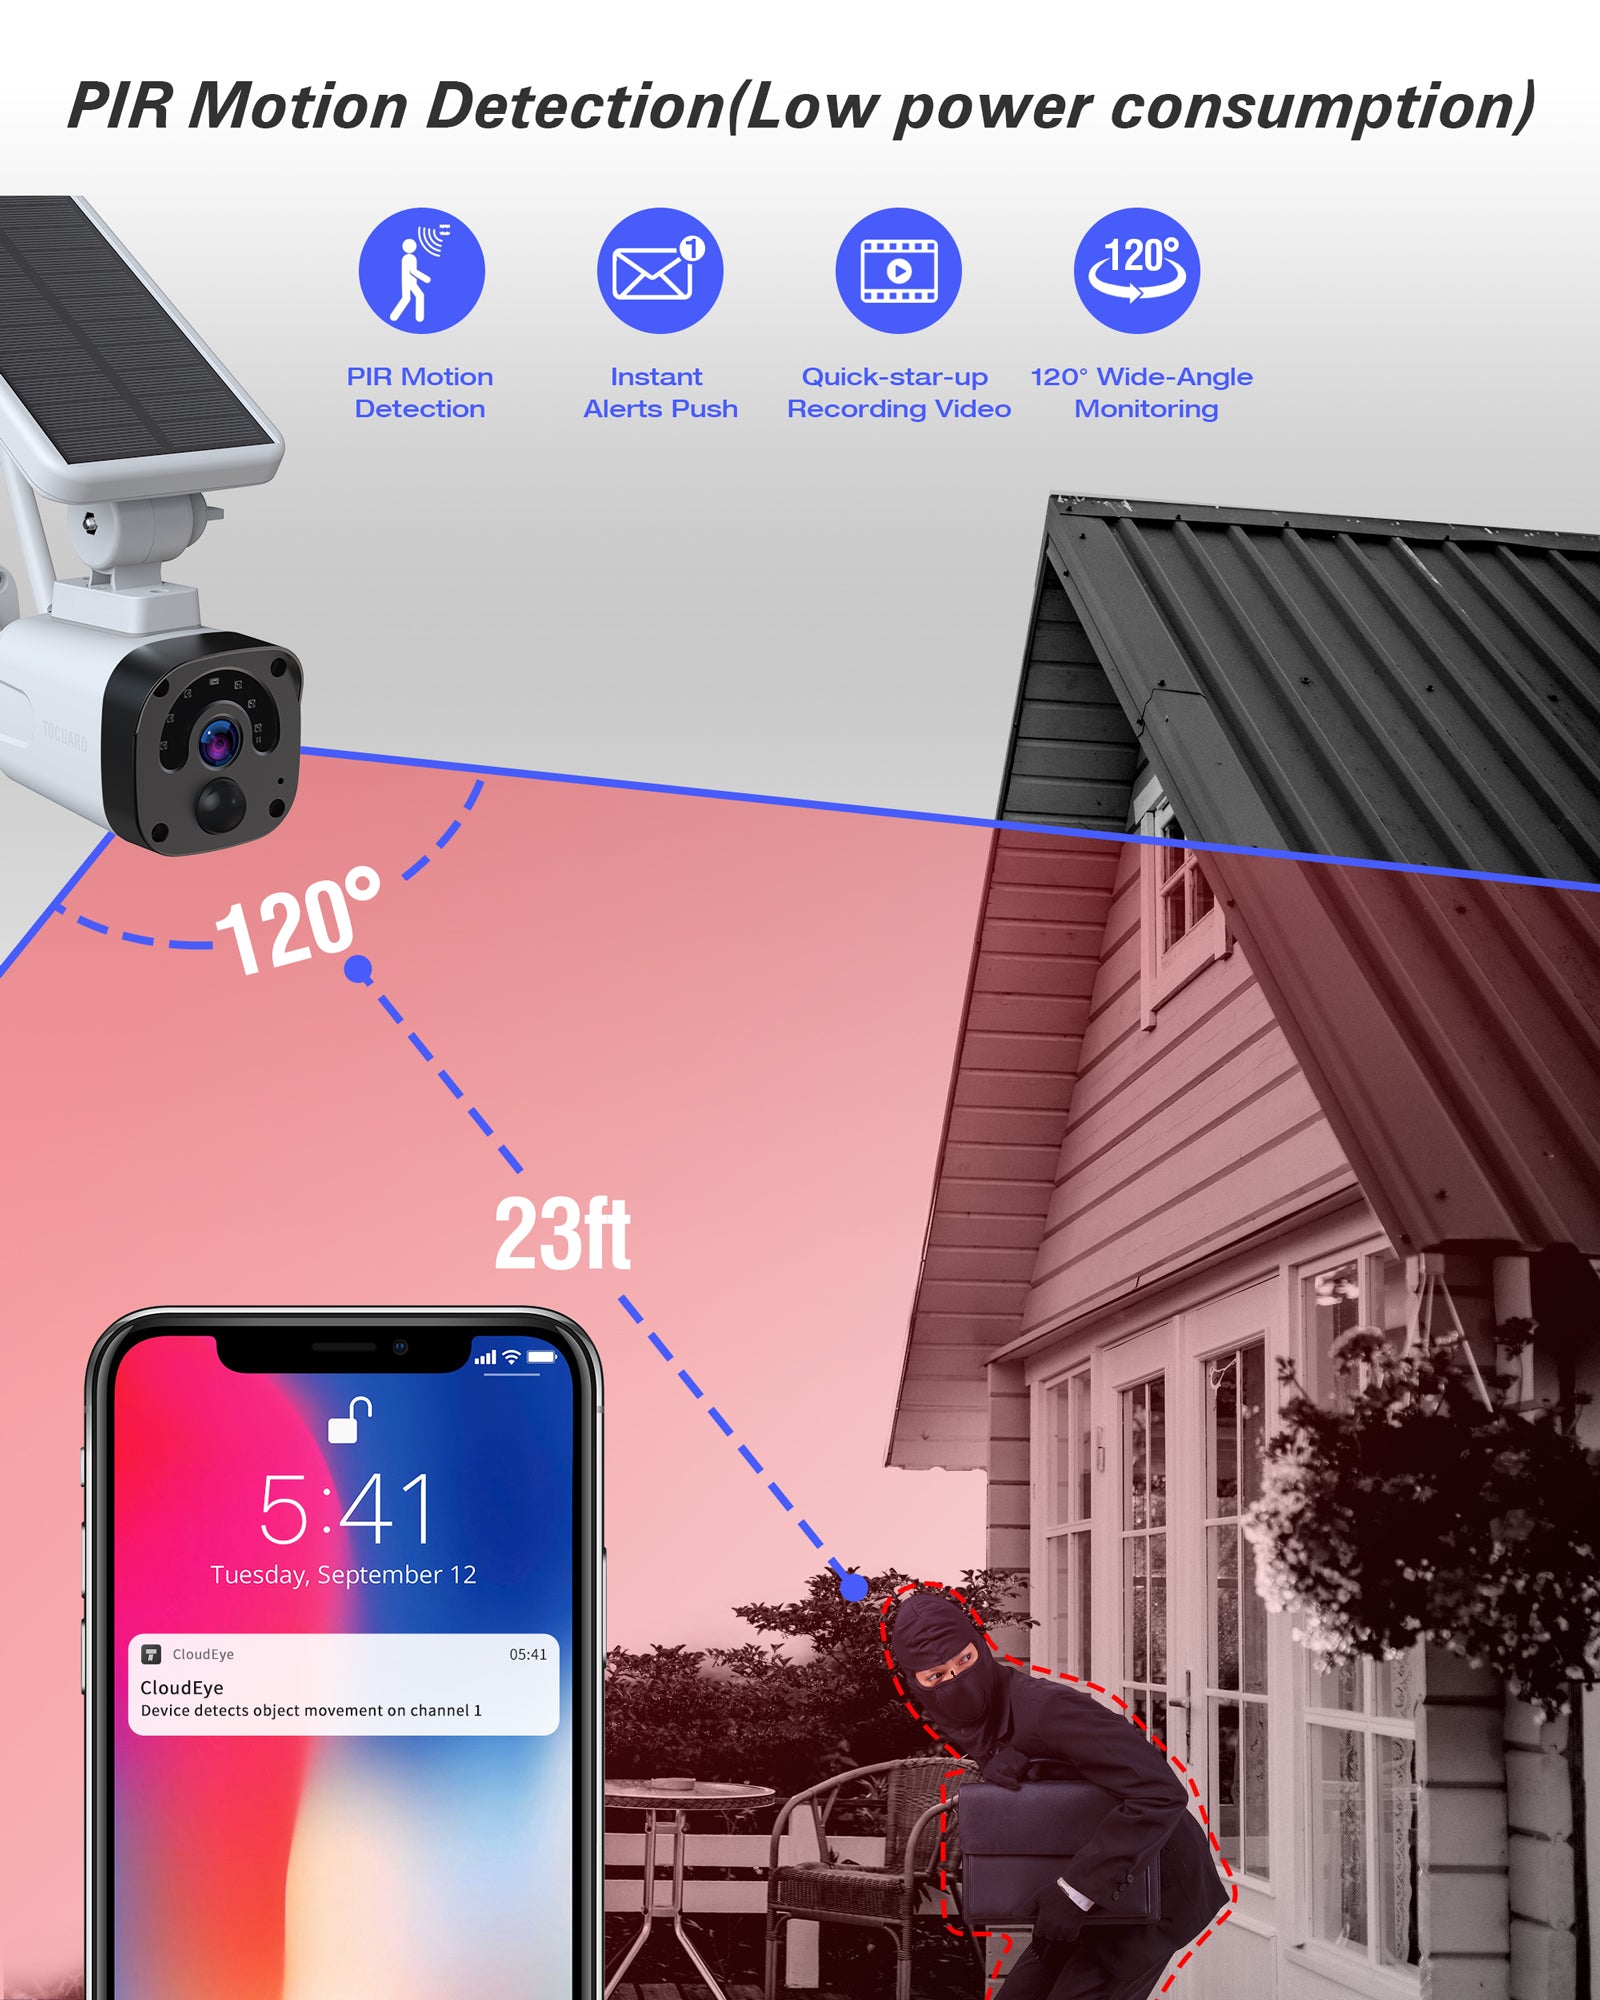 Toguard W601 3MP Outdoor Wireless WiFi (Includes Base Station and 1 Camera) Solar Battery Powered  Security Camera System